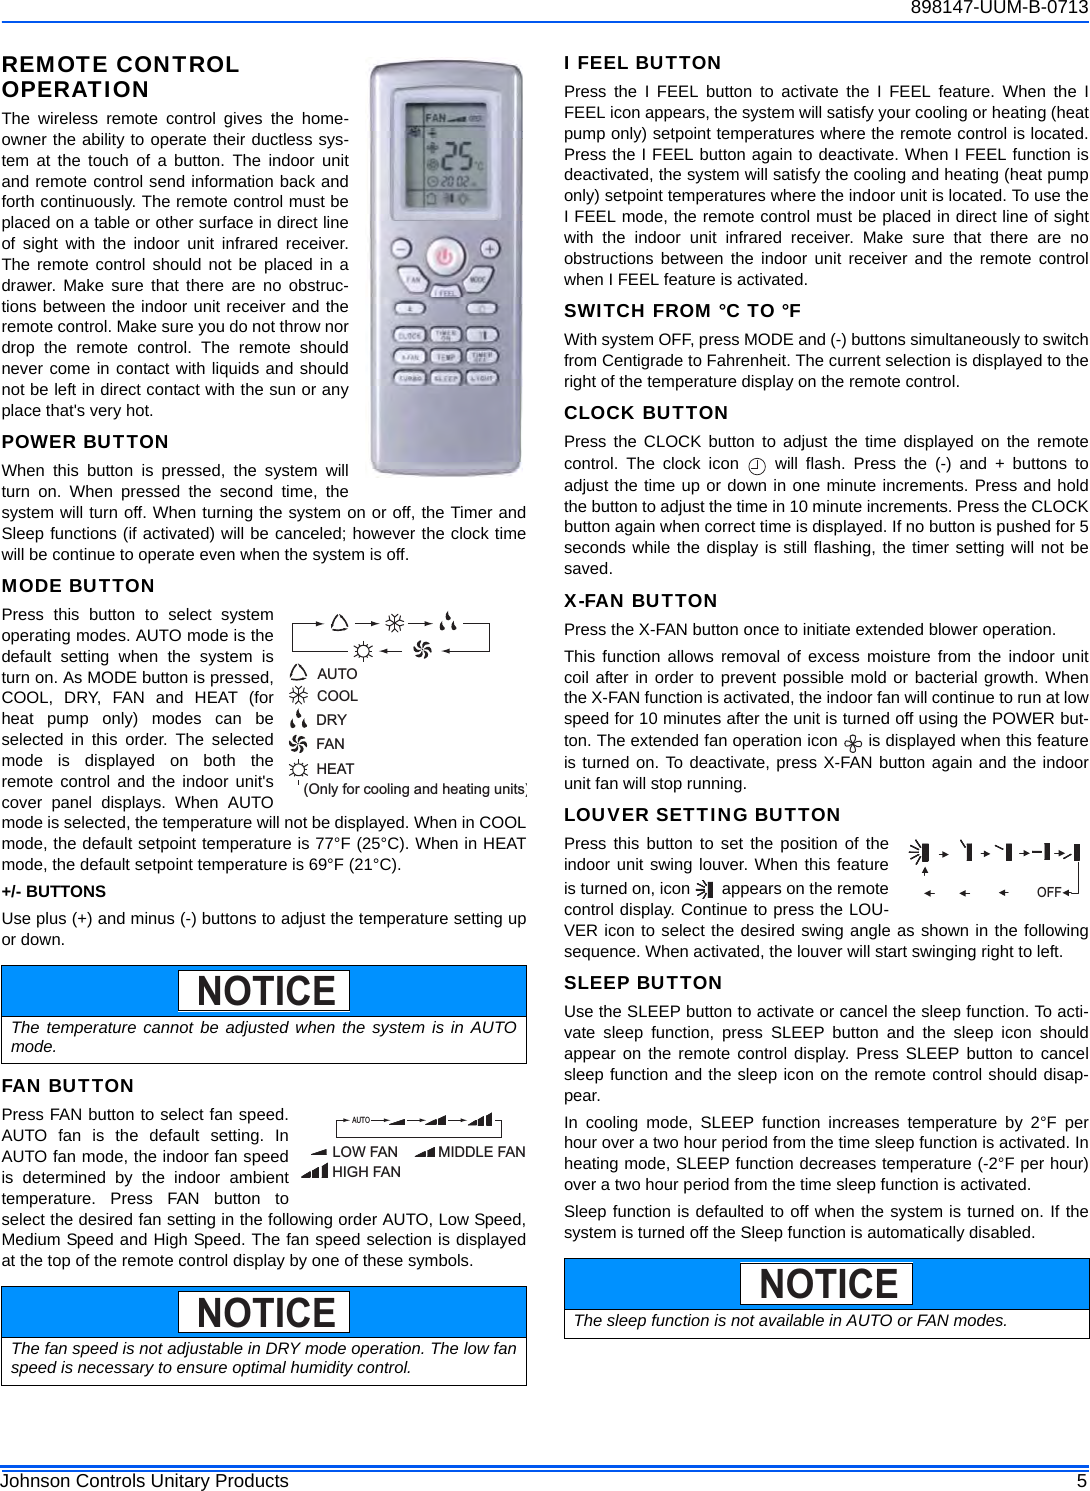 Page 5 of 10 - York Lx-Mini-Split-Air-Conditioners-Owner-S 898147-UUM-B-0713 User Manual York-lx-mini-split-air-conditioners-owner-s-manual